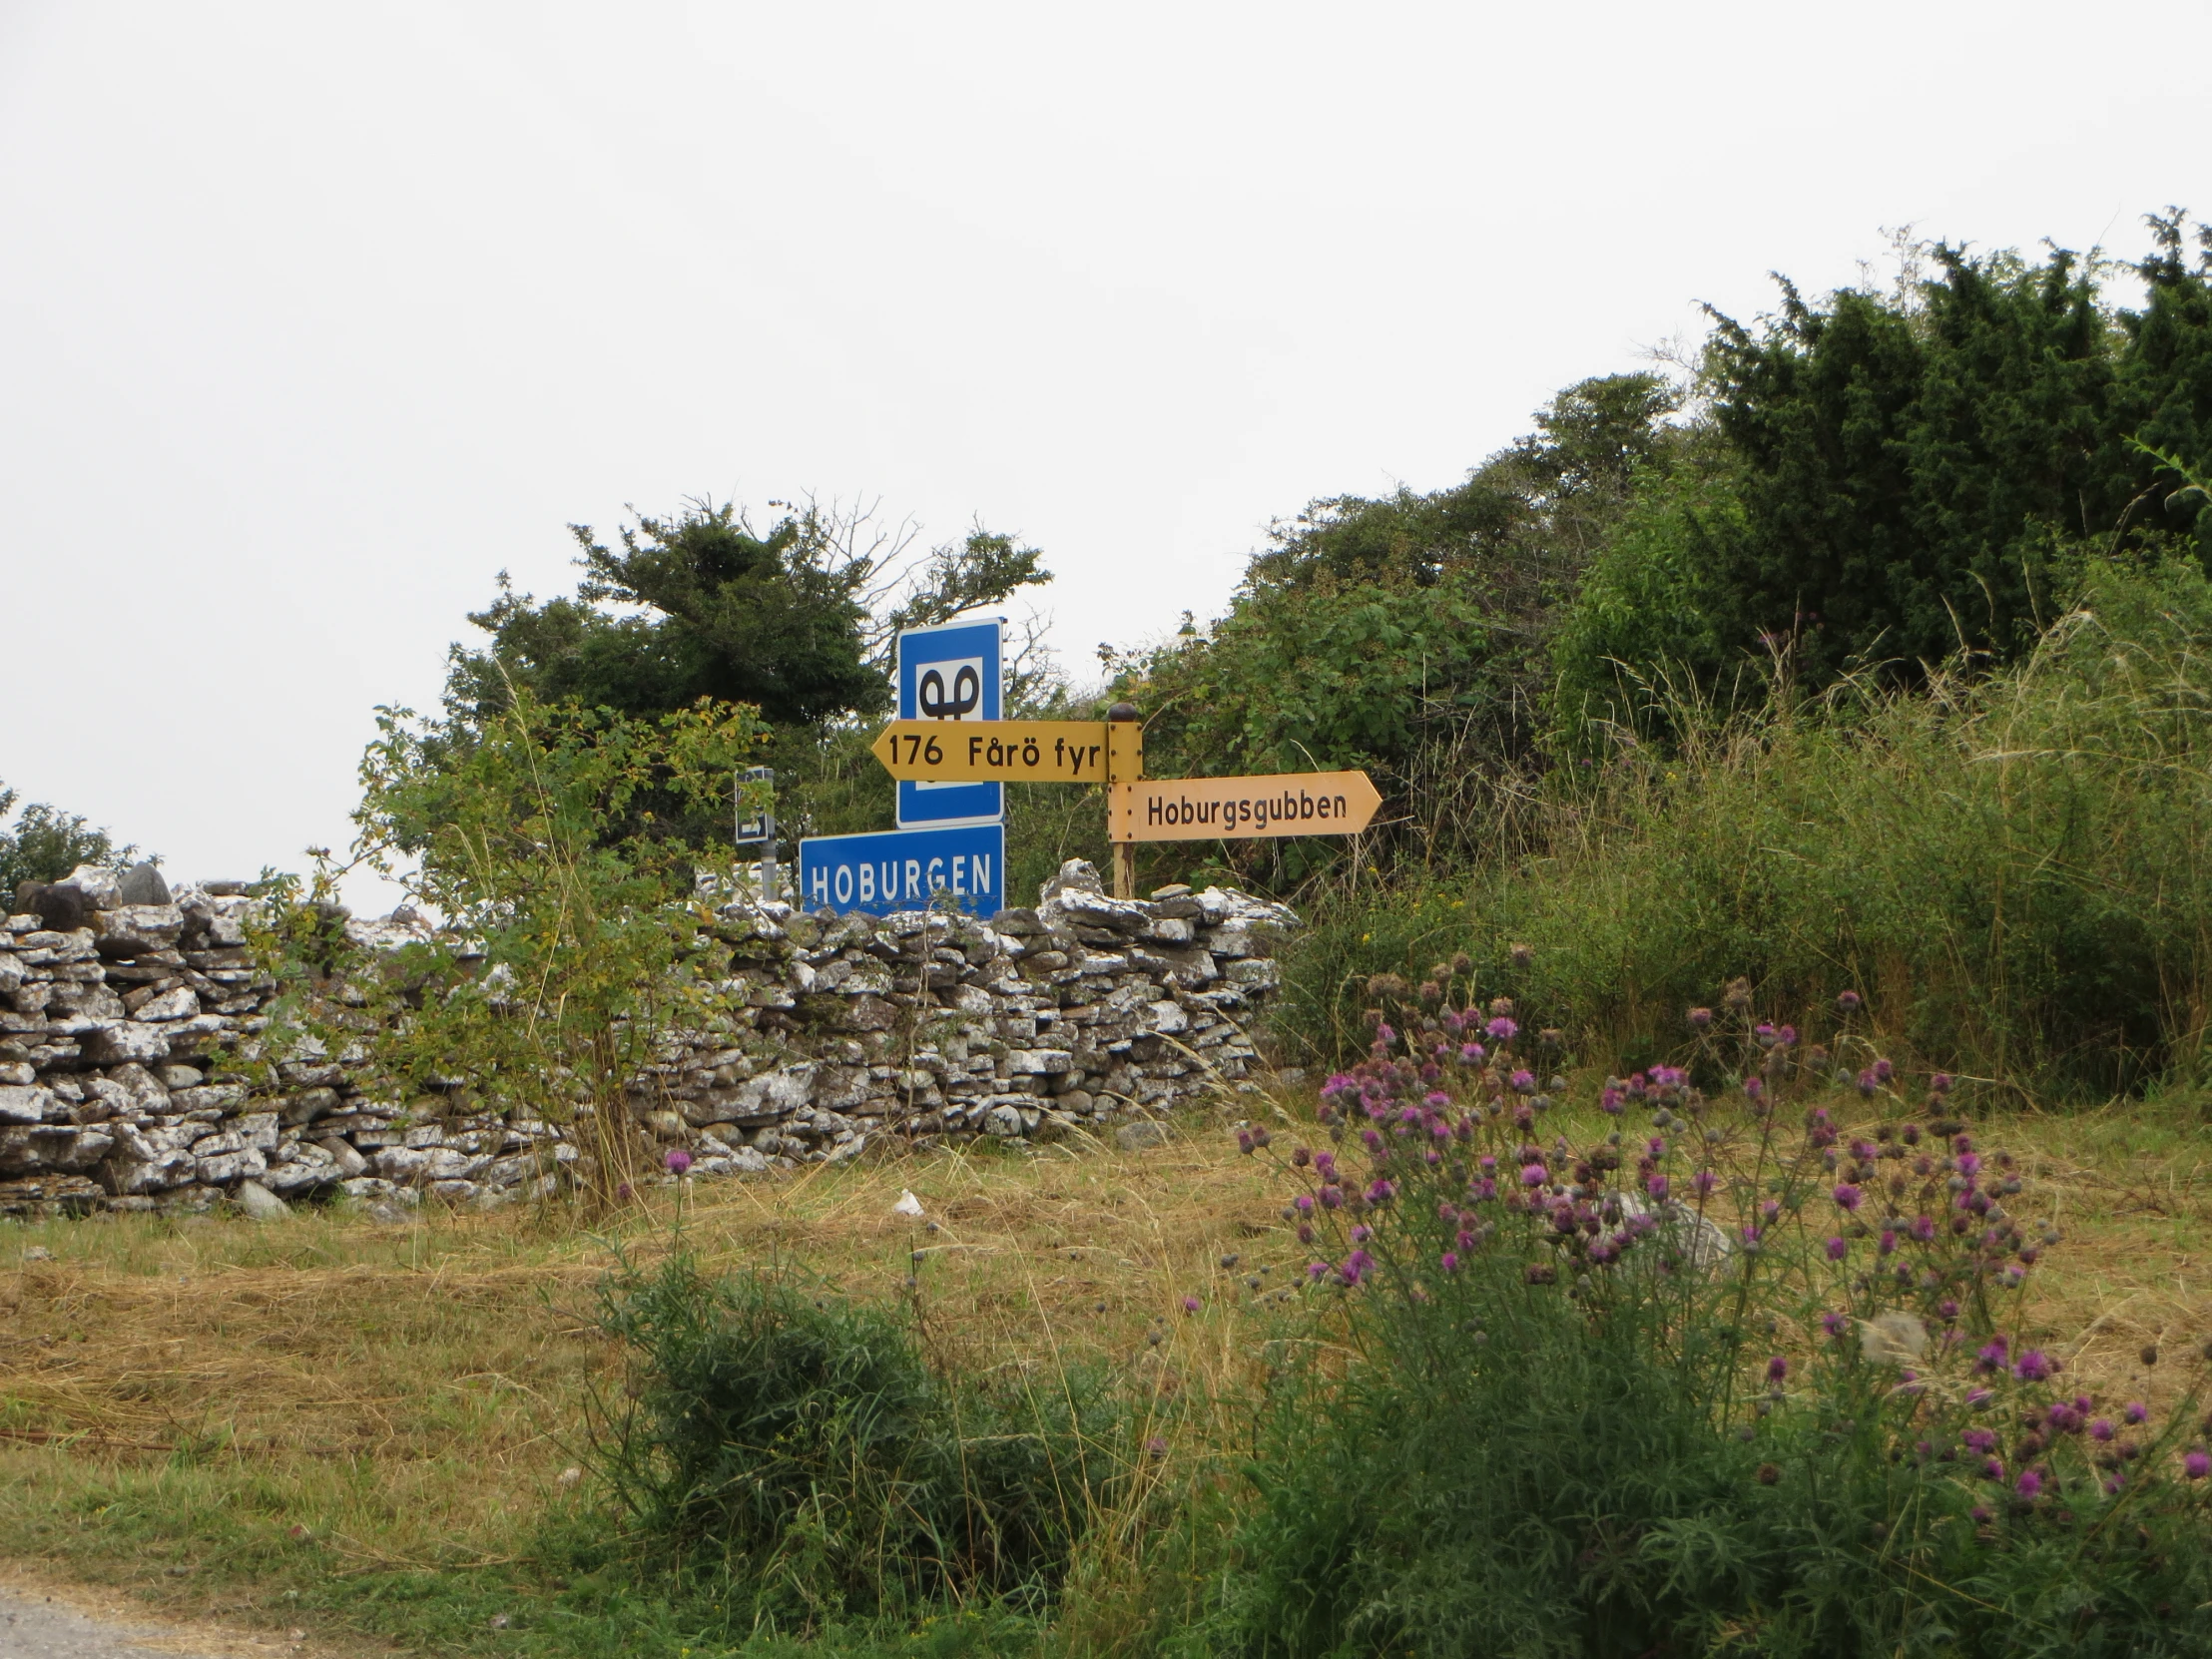 signs and landscaping are at the bottom of a hill